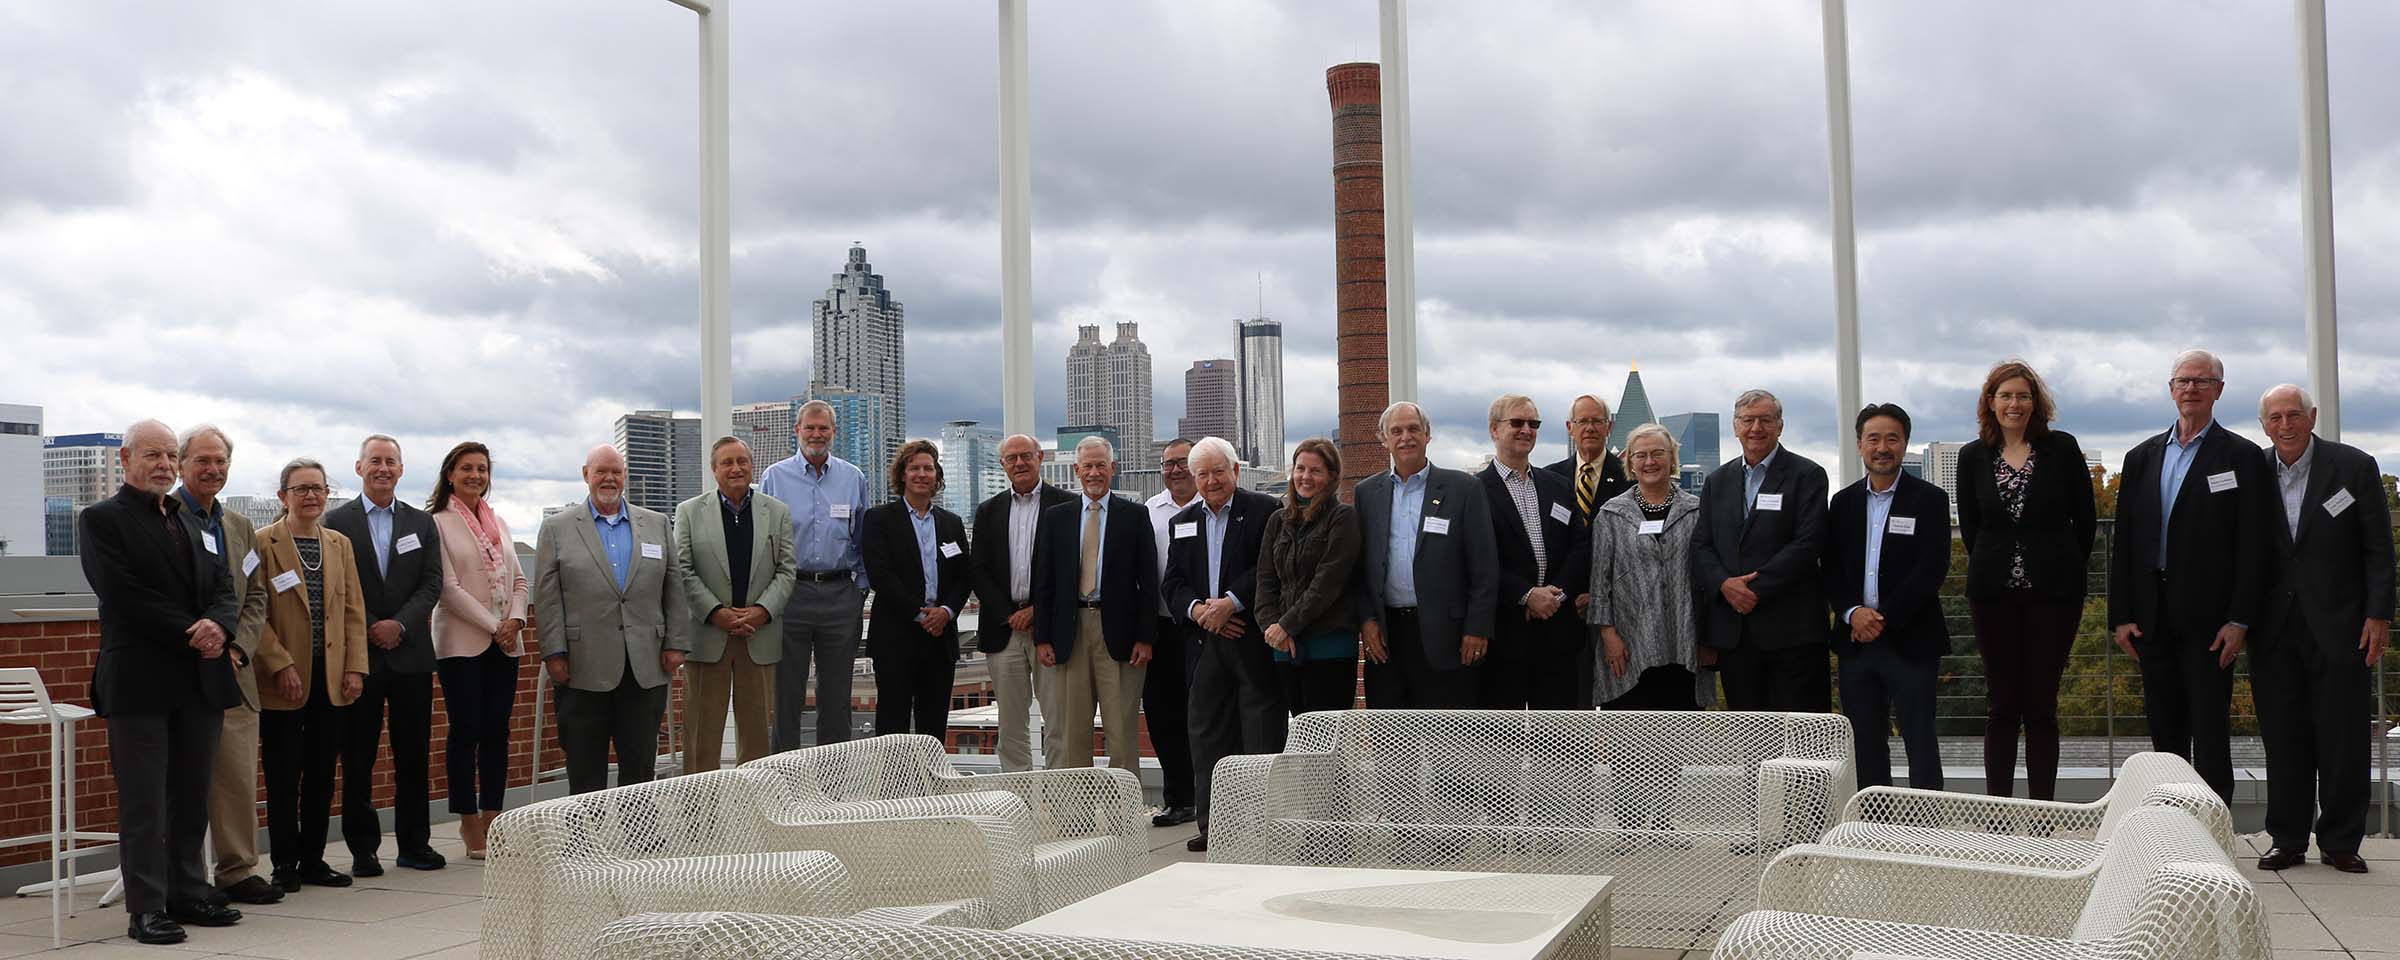 The COS Advisory Board members in a line on top of the Kendeda building, with the overcast Atlanta skyline behind them